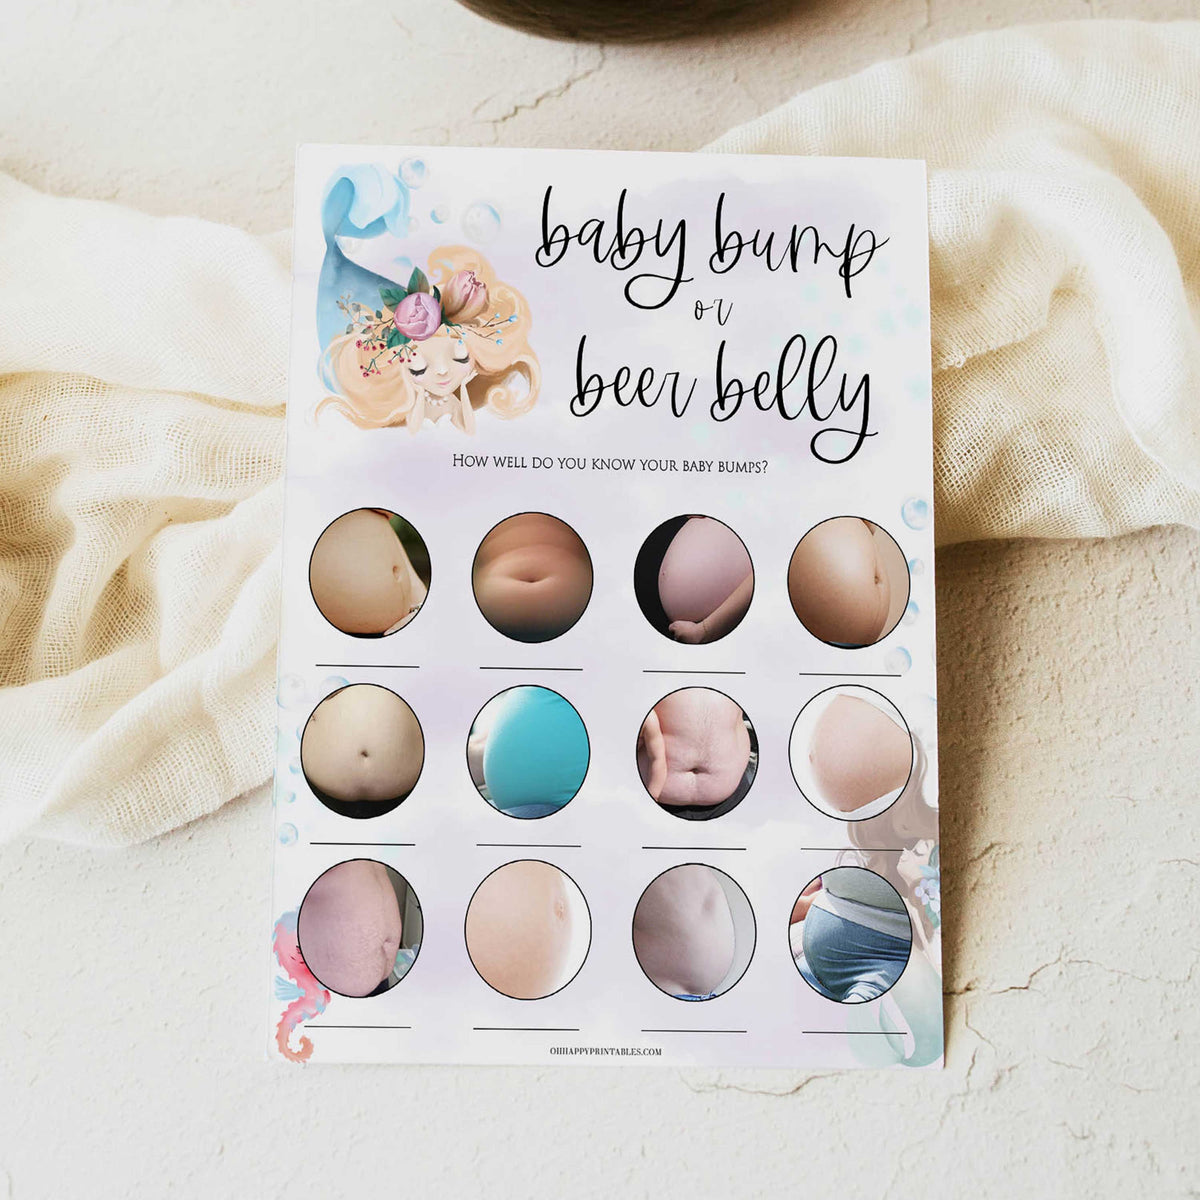 baby bump or beer belly game, Printable baby shower games, little mermaid baby games, baby shower games, fun baby shower ideas, top baby shower ideas, little mermaid baby shower, baby shower games, pink hearts baby shower ideas